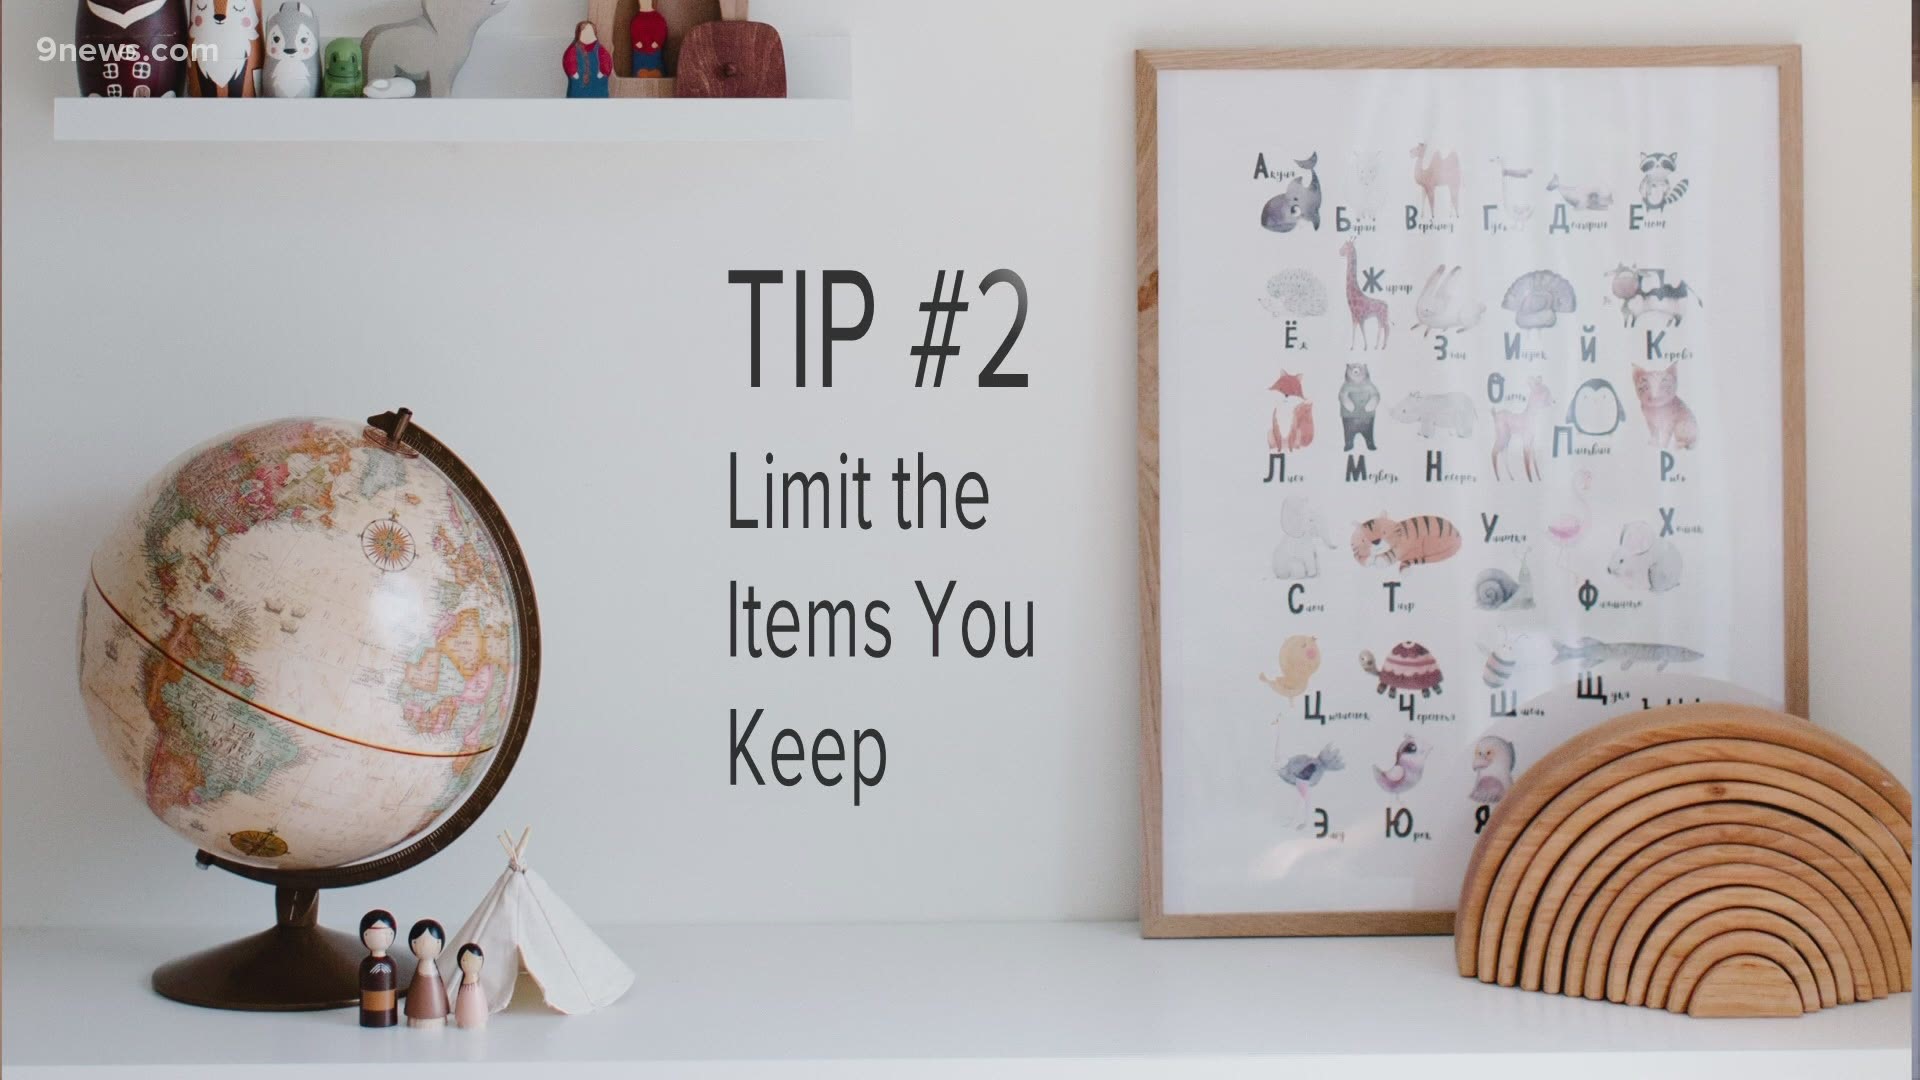 Adrian Egolf from the Clean Slate Living Company gives us some tips on how to best organize our favorite keepsakes.